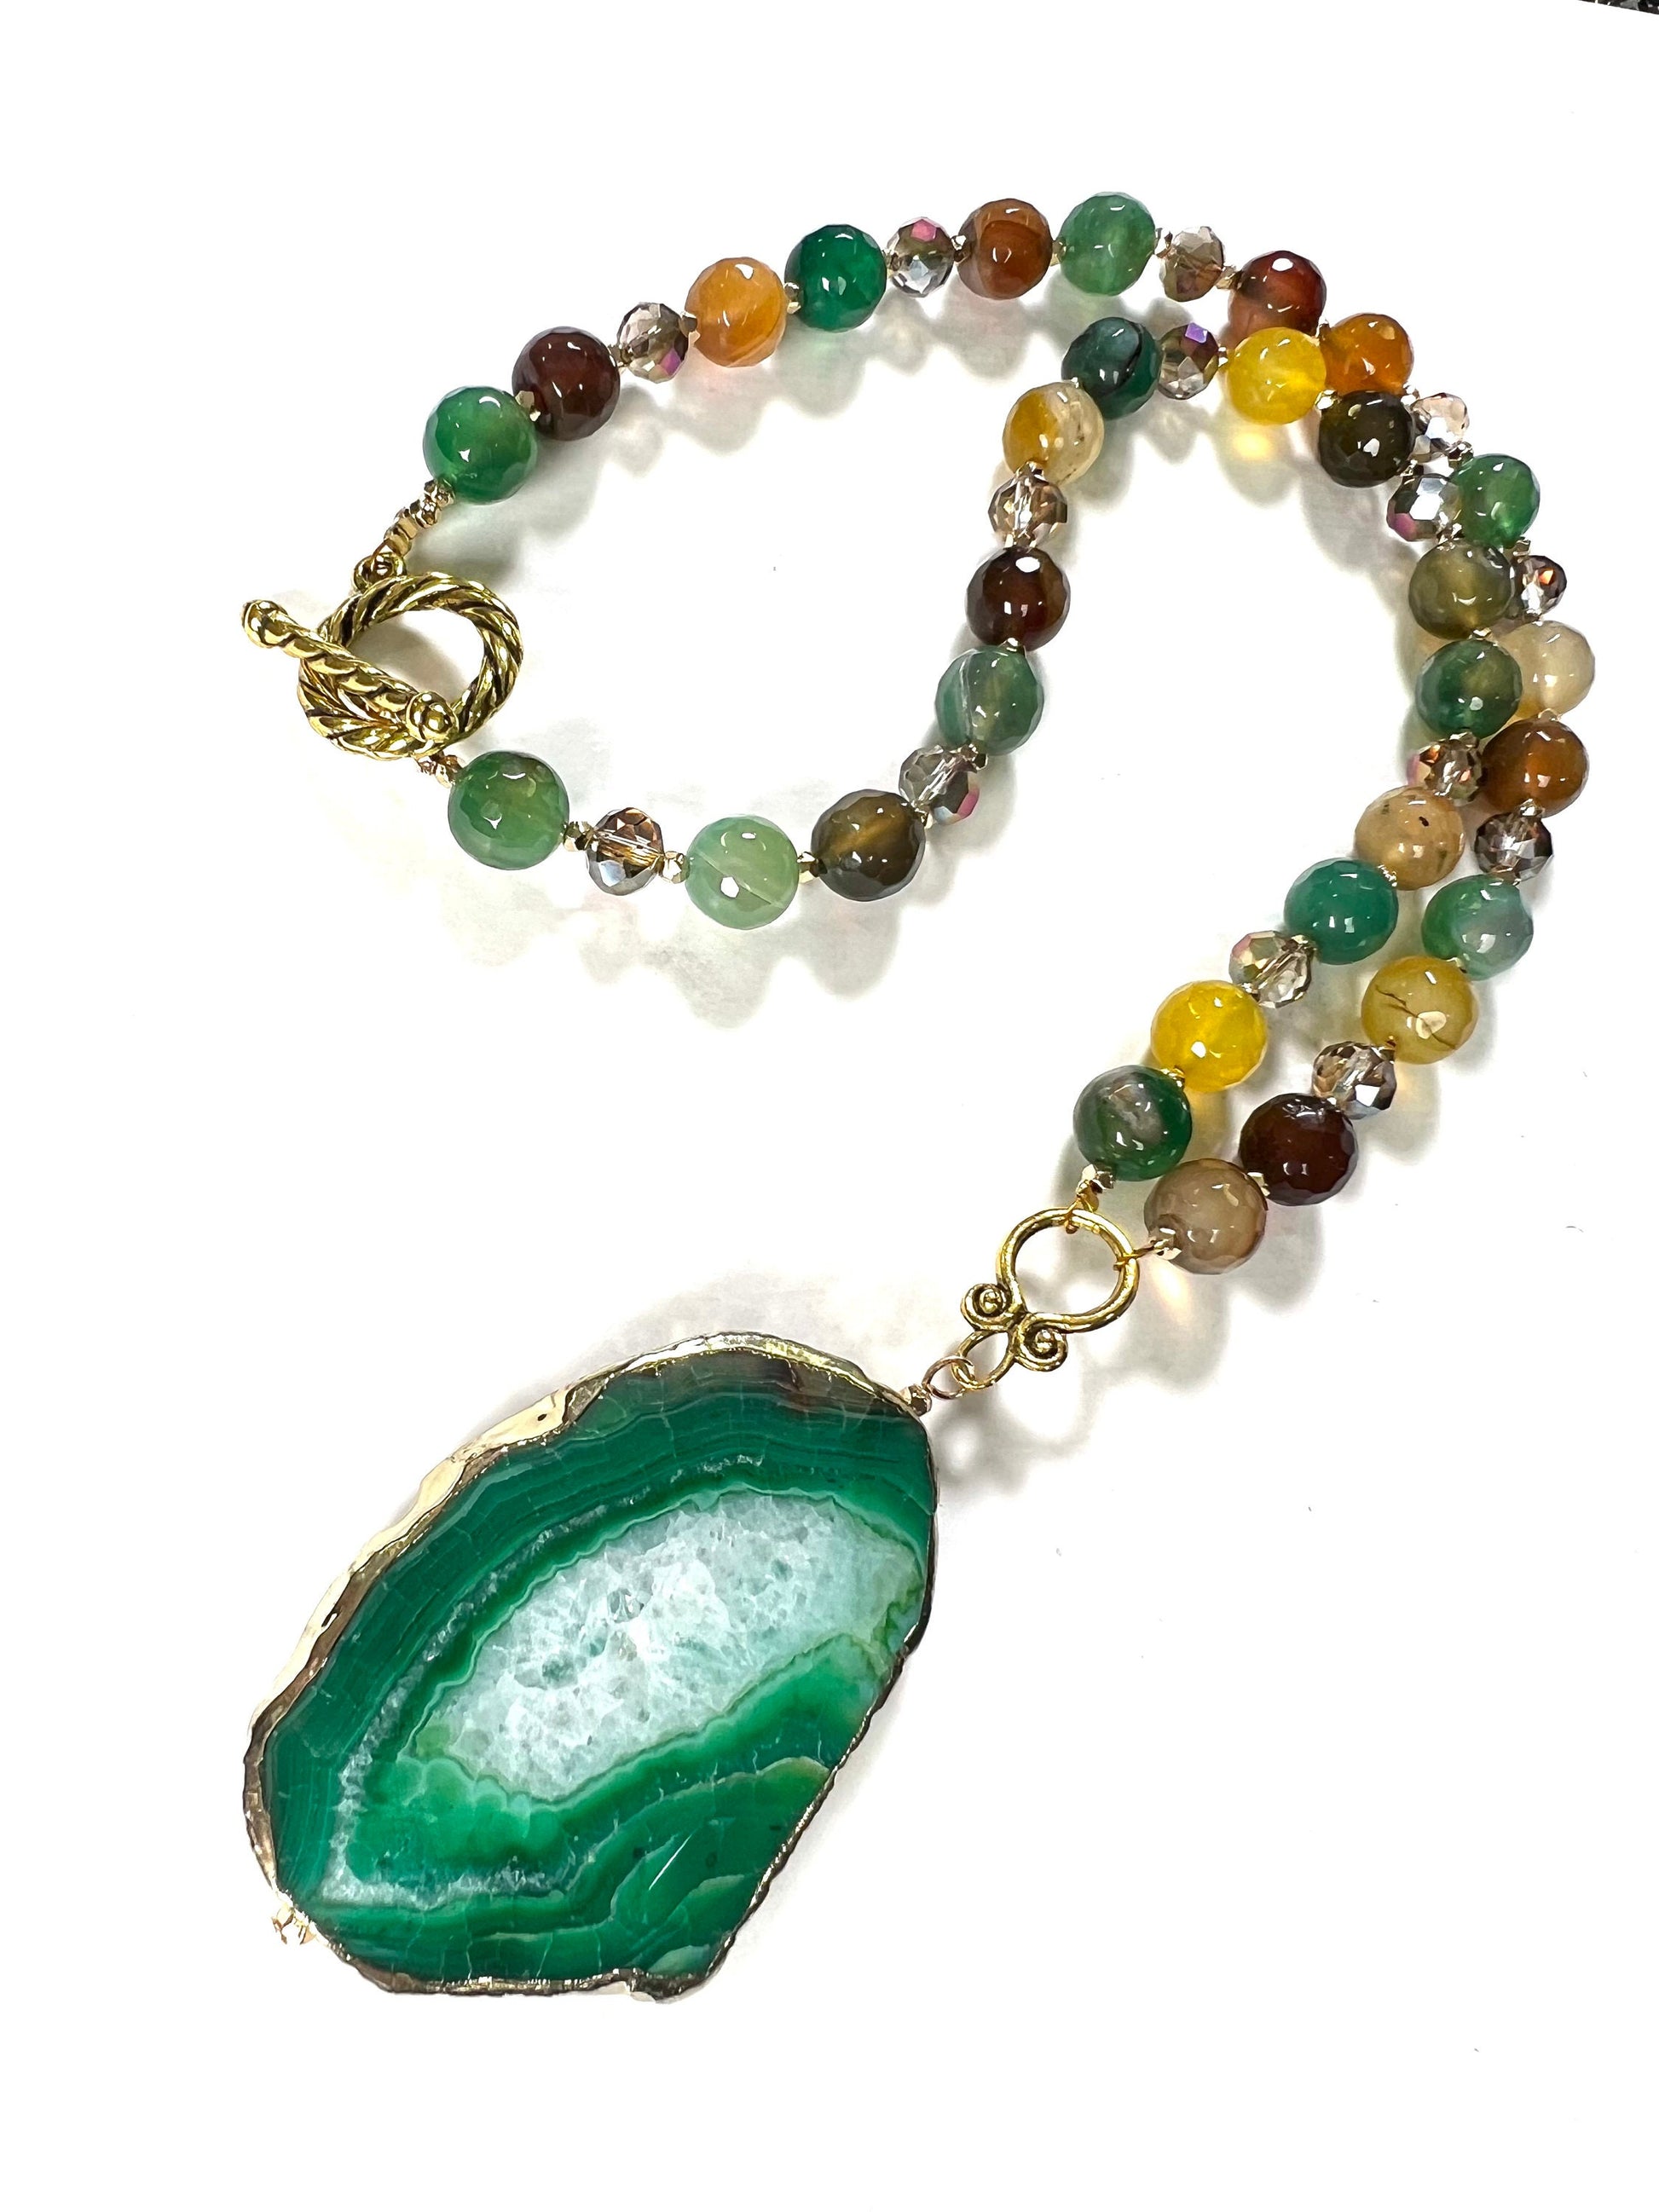 Natural Fire Agate 8mm round and natural green fire agate gold hazel chunk pendant 21" Necklace. Antique gold toggle, Yellow green necklace